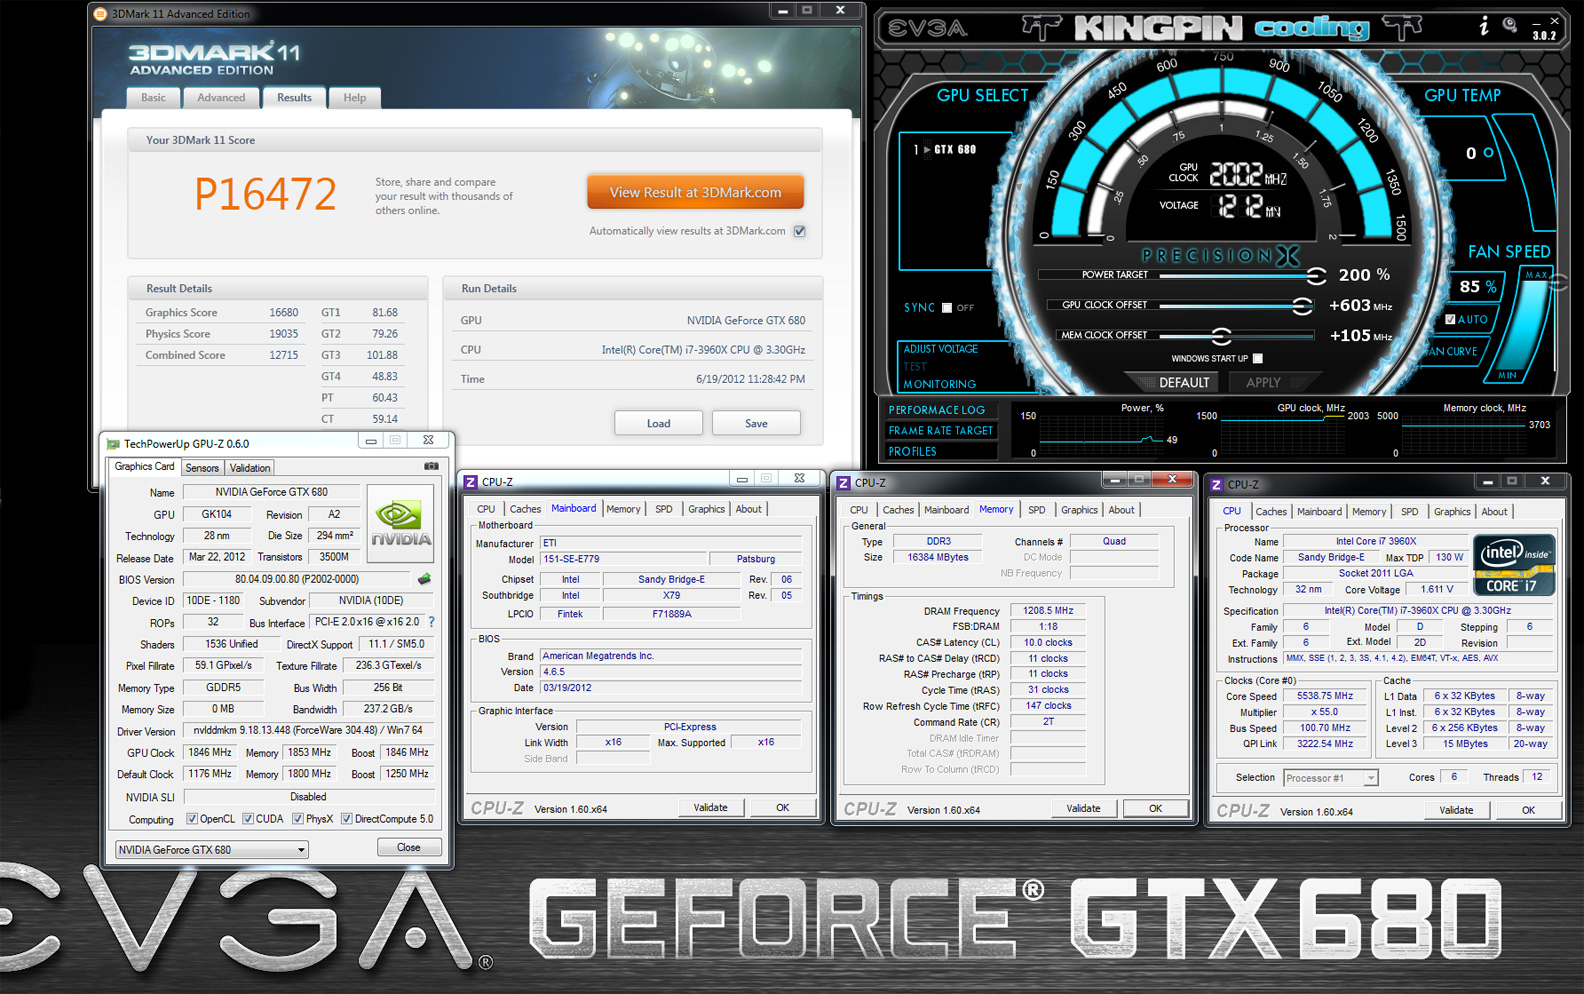 Media asset in full size related to 3dfxzone.it news item entitled as follows: Una GeForce GTX 680 @ 2GHz esegue il benchmark 3DMark 11 | Image Name: news17490_1.jpg